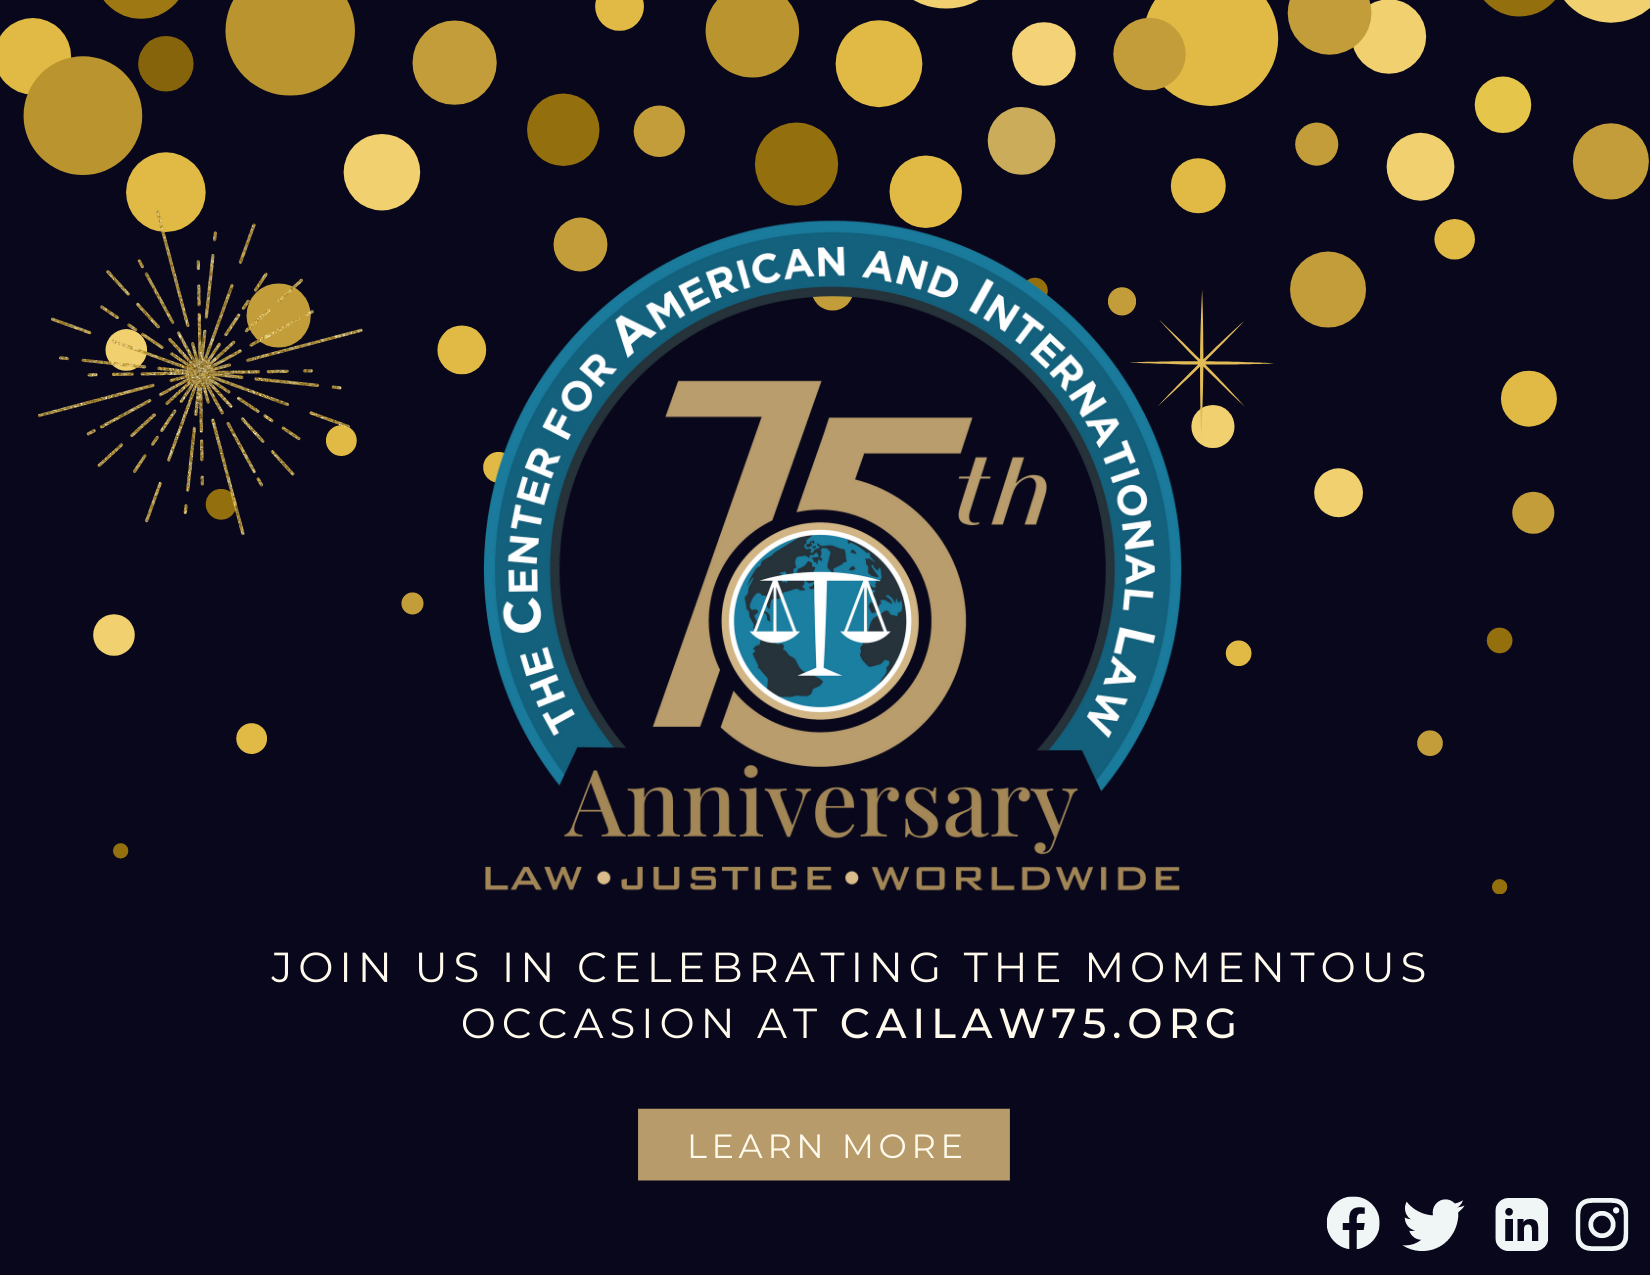 The Center for American and International Law 75th Anniversary Celebration.